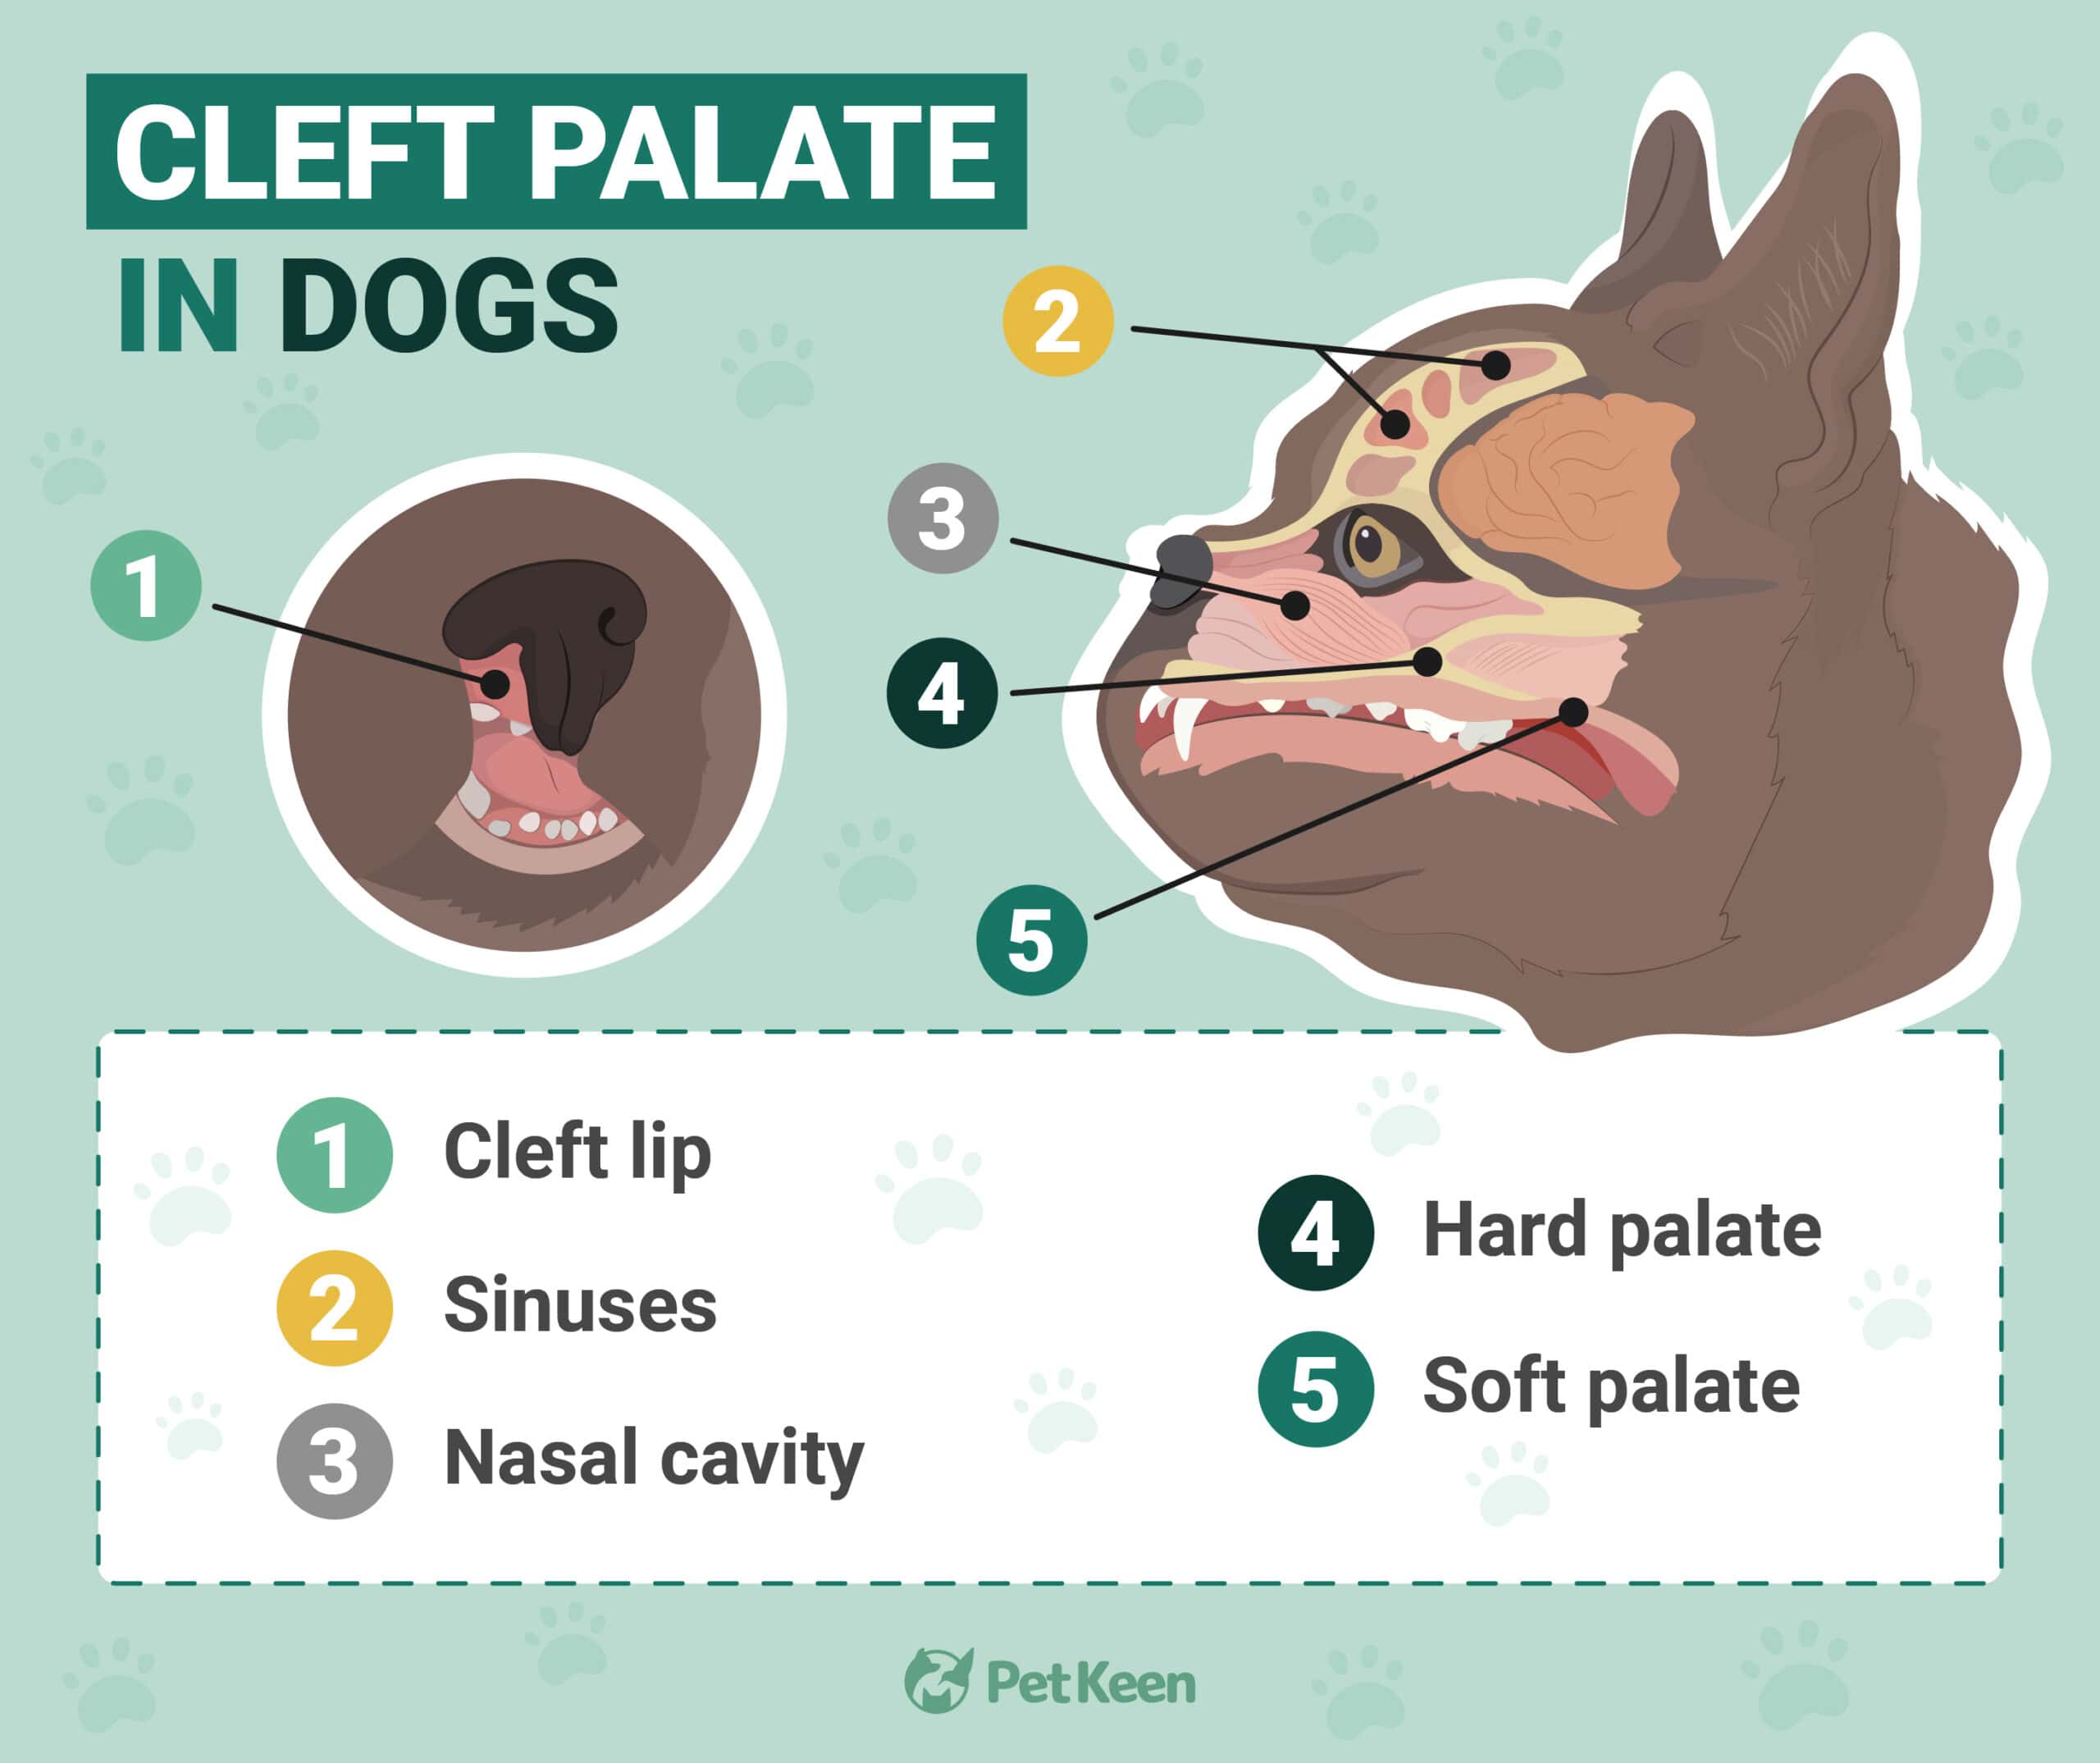 Cleft palette in dogs